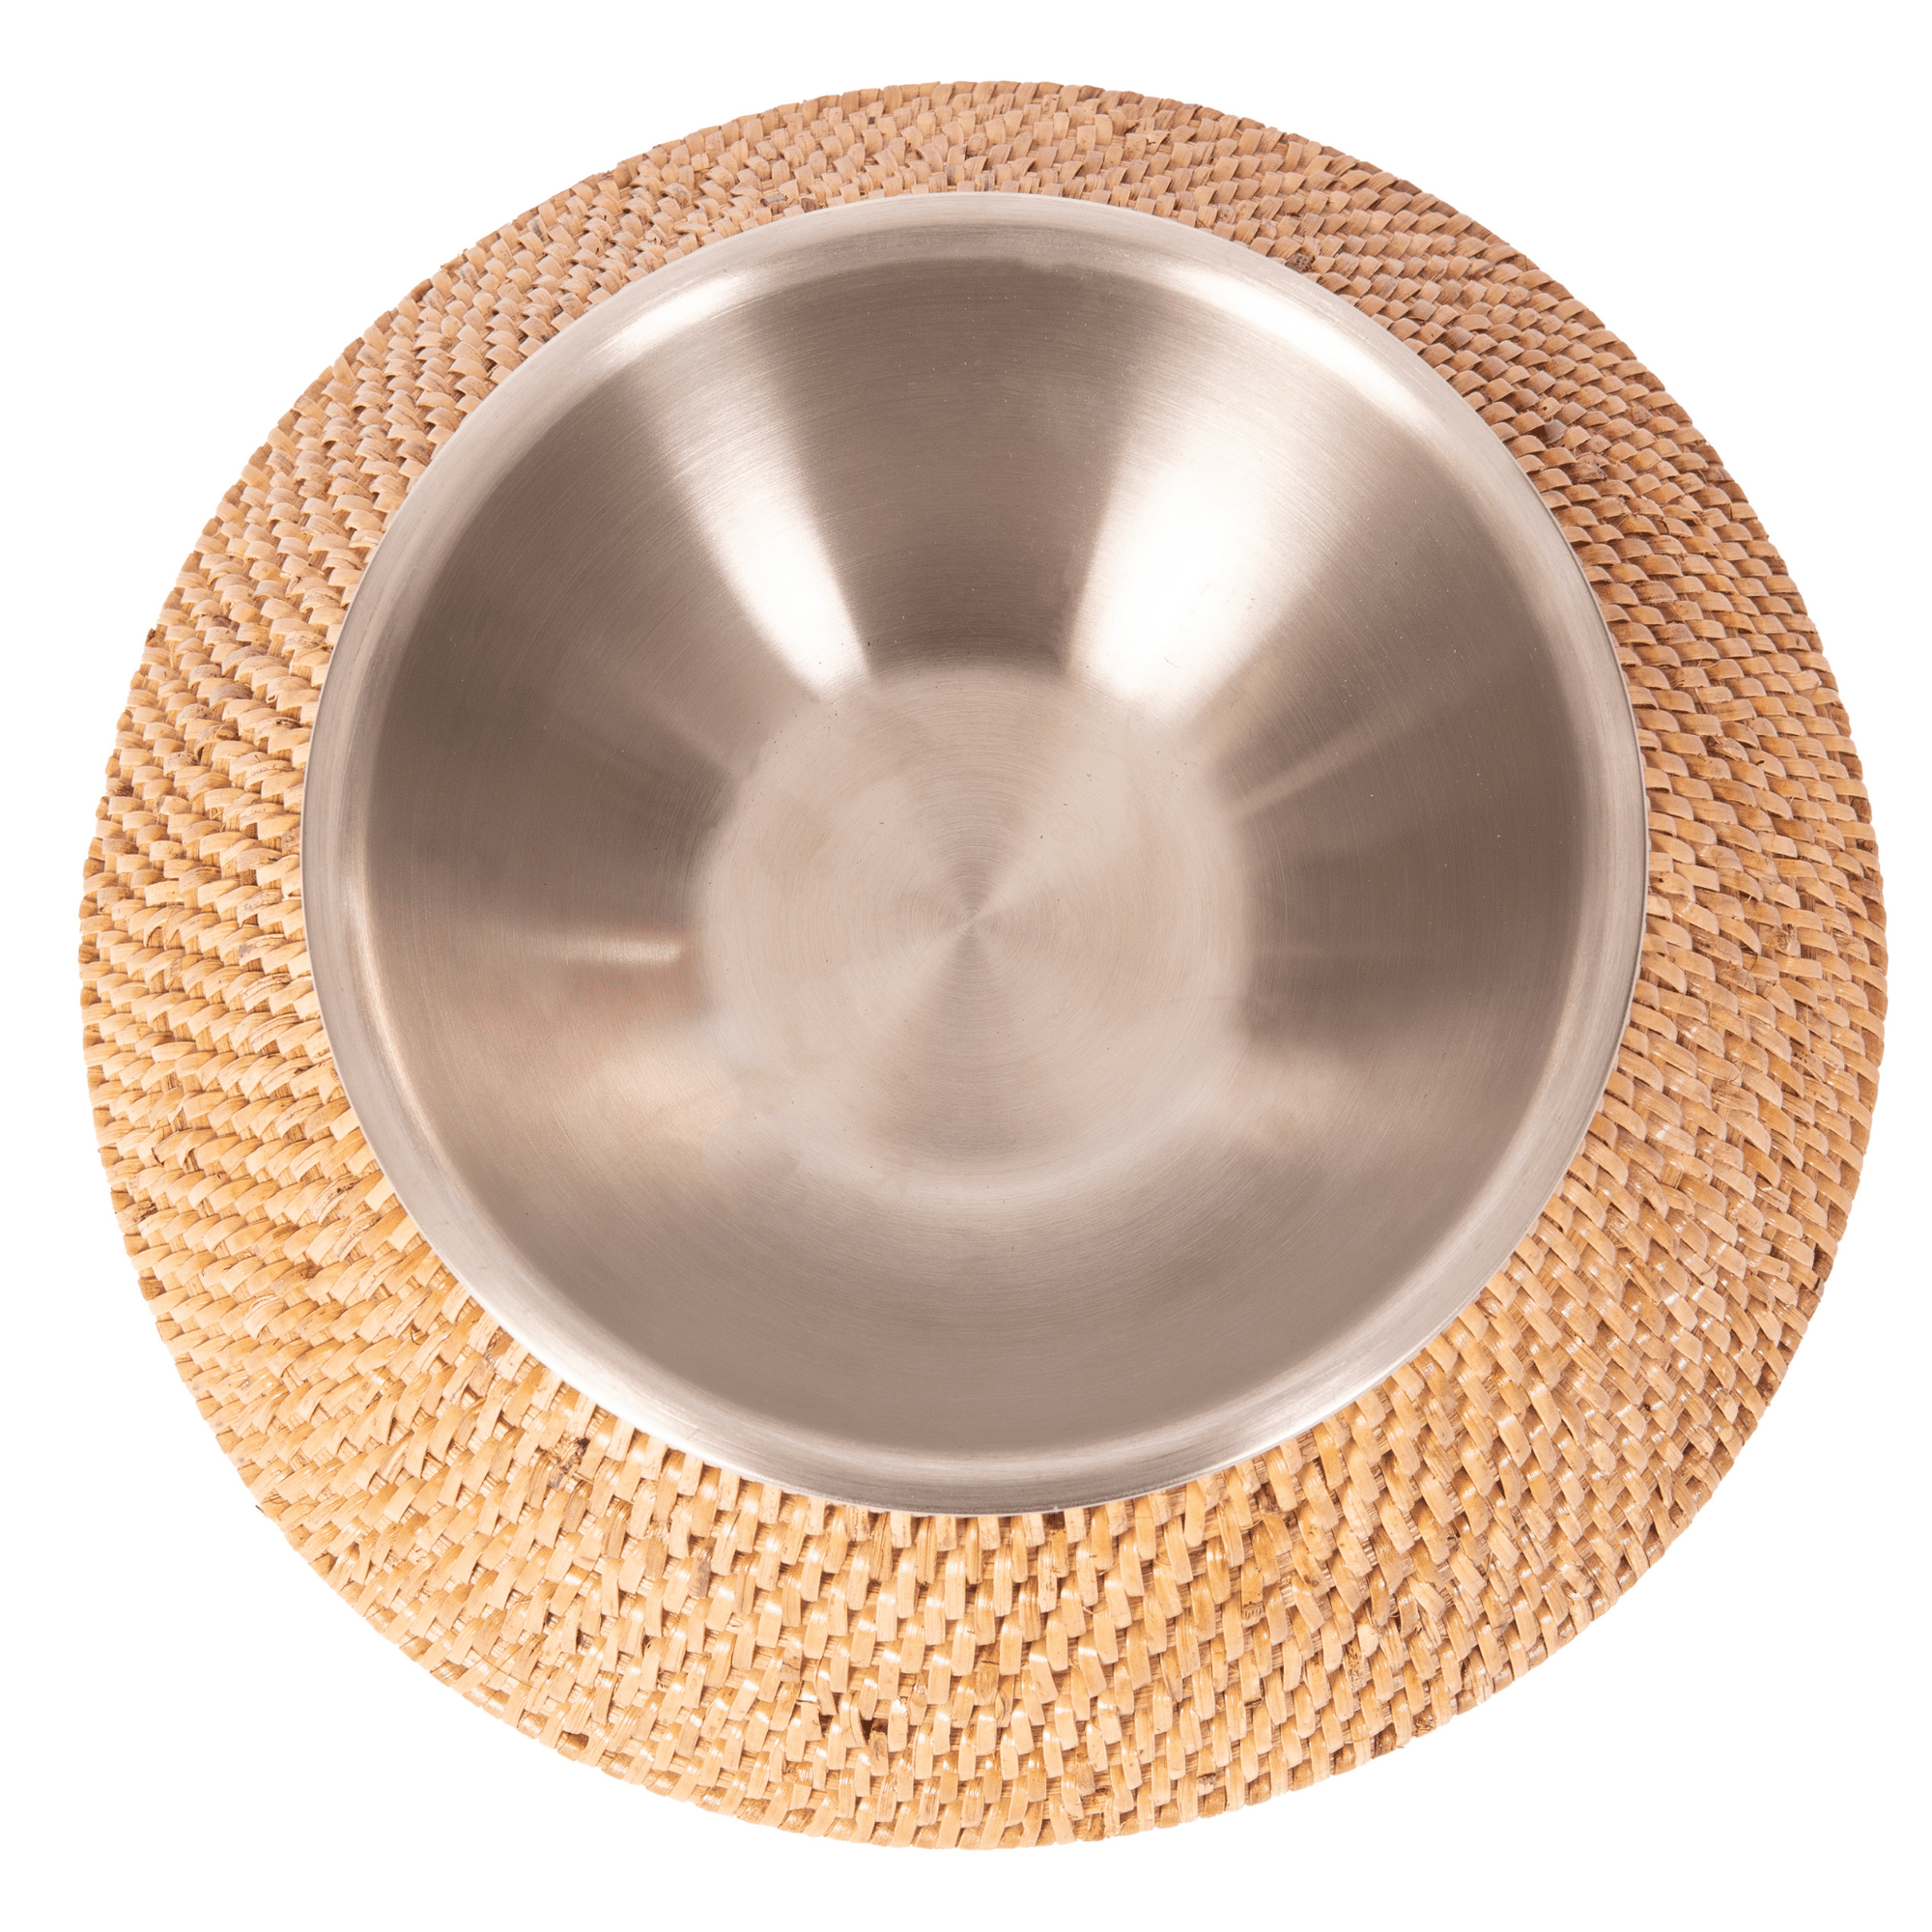 Pet Bowl with Removable Stainless-Steel Bowl